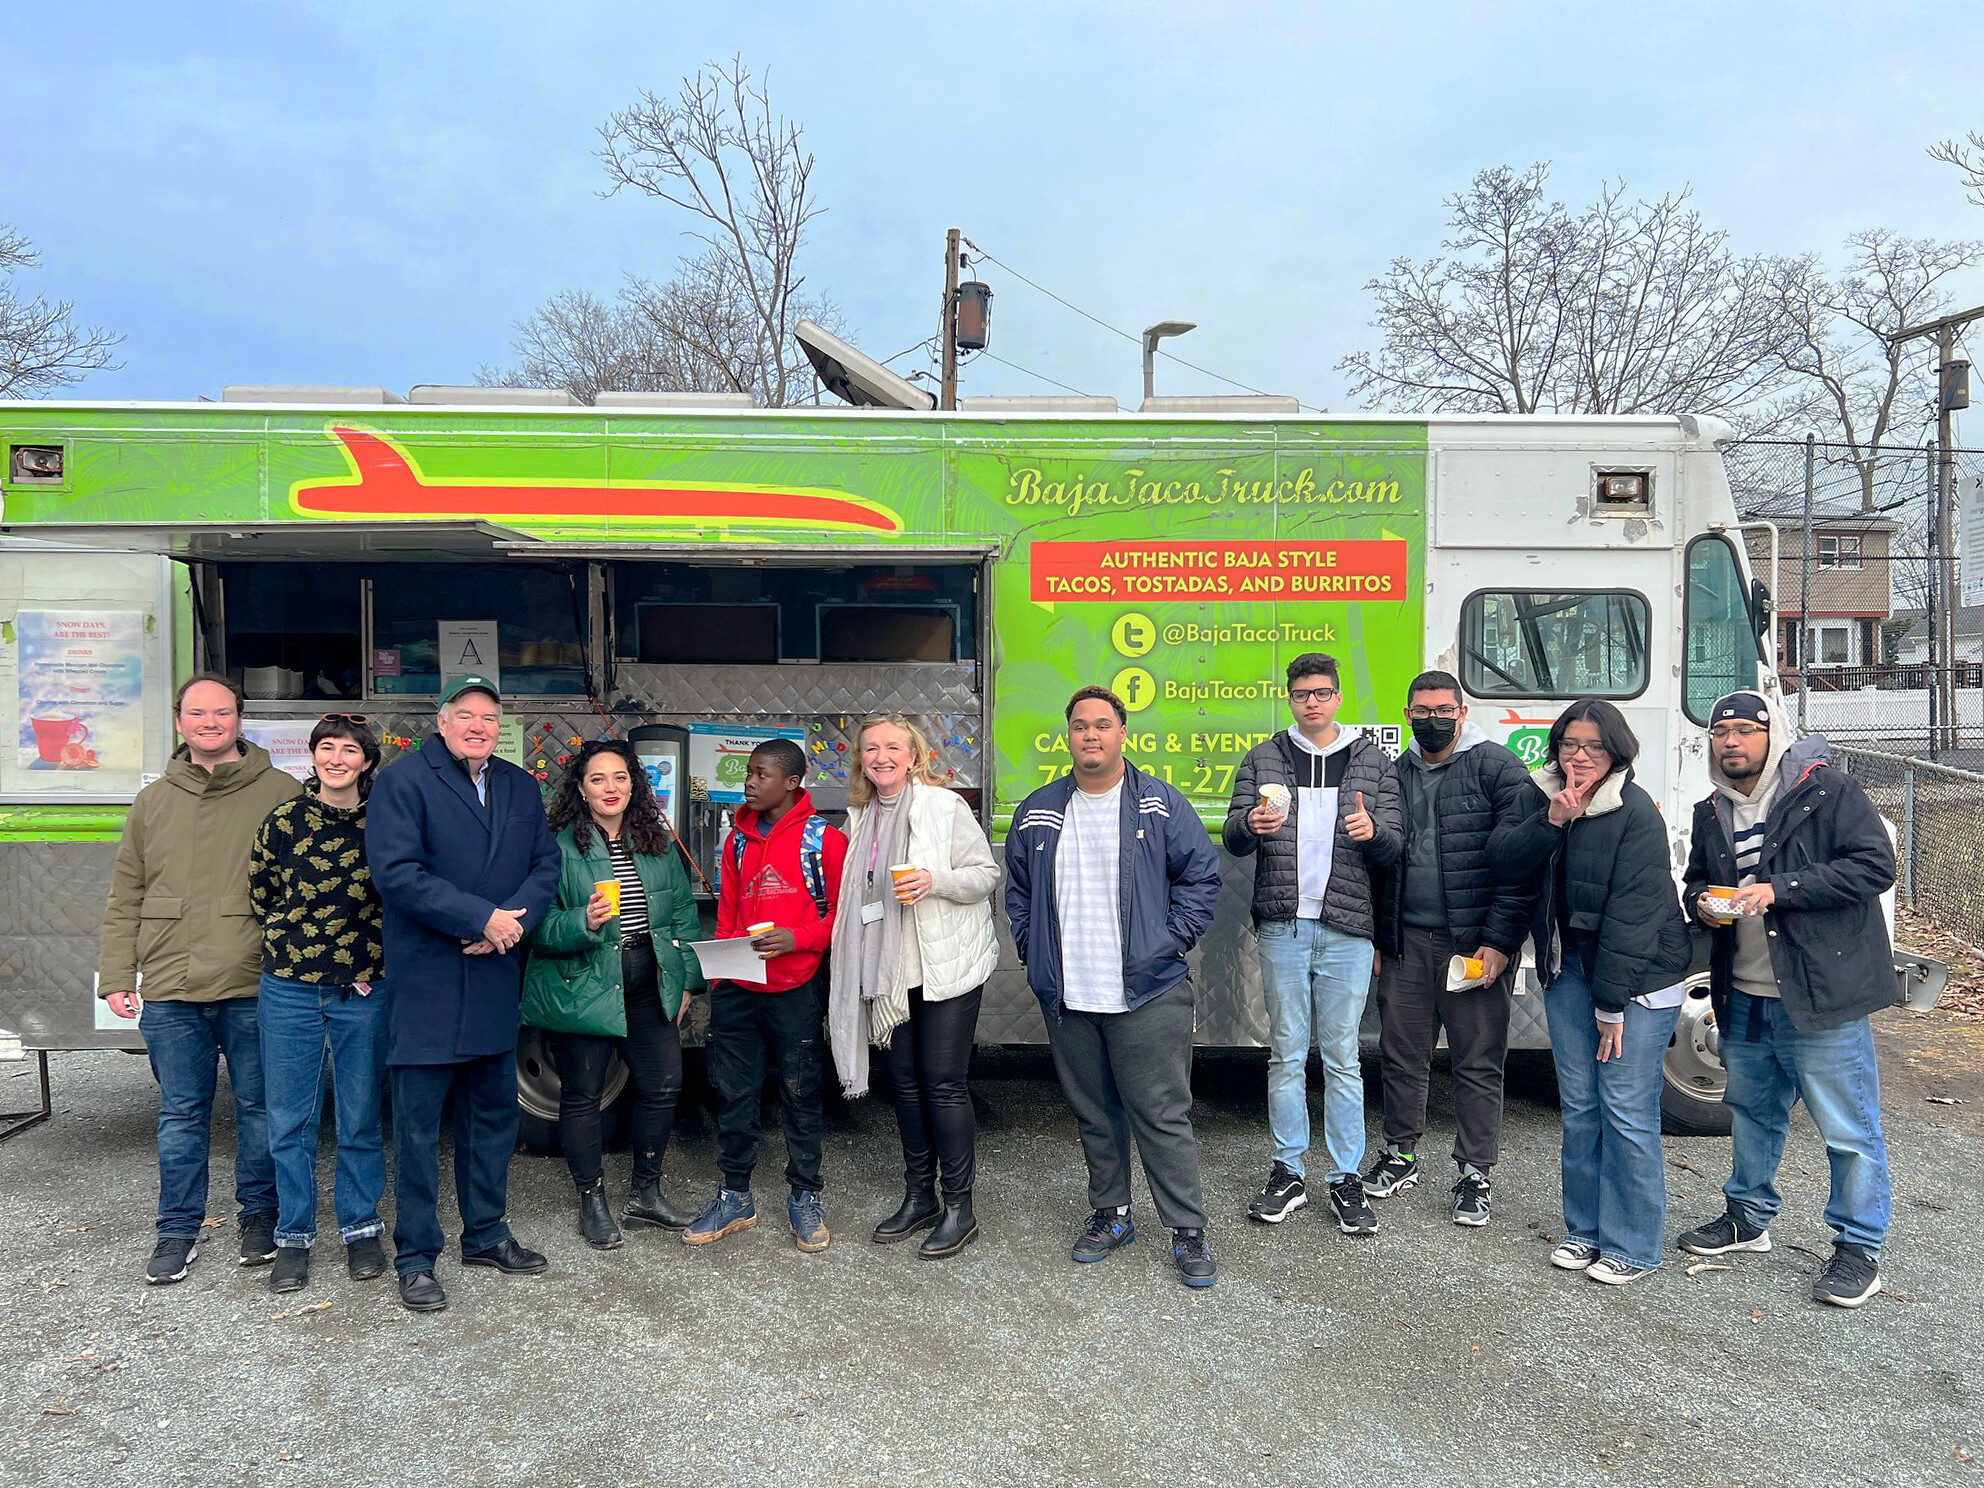 Members of MONUM, CultureHouse, community members, and State Representative stand in front of Baja Taco Truck holding hot cocoa and churros.